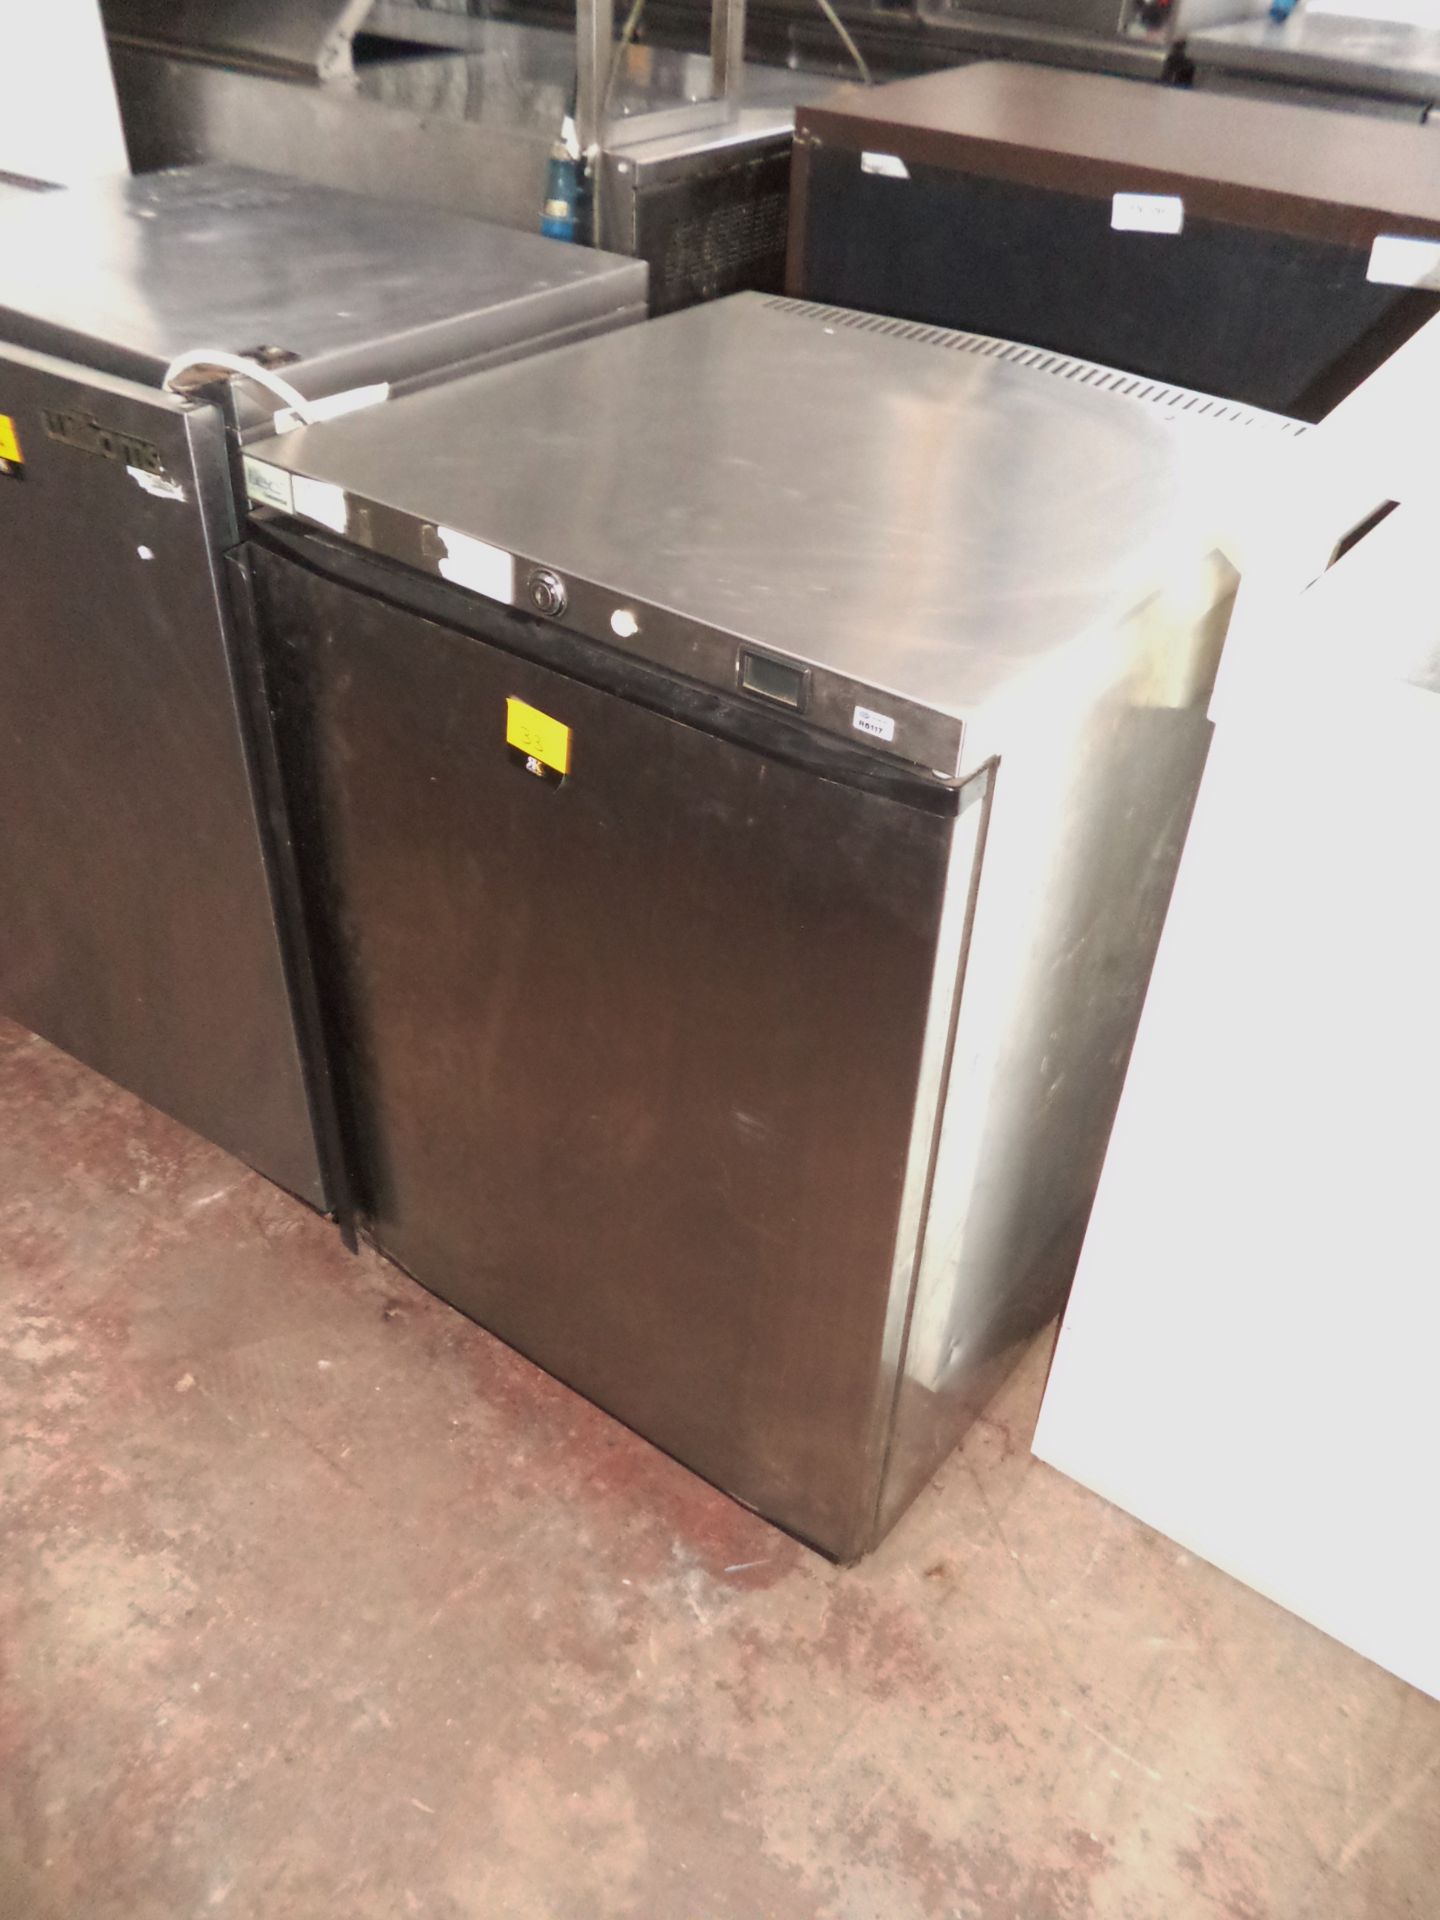 LEC stainless steel commercial counter height fridge IMPORTANT: Please remember goods successfully